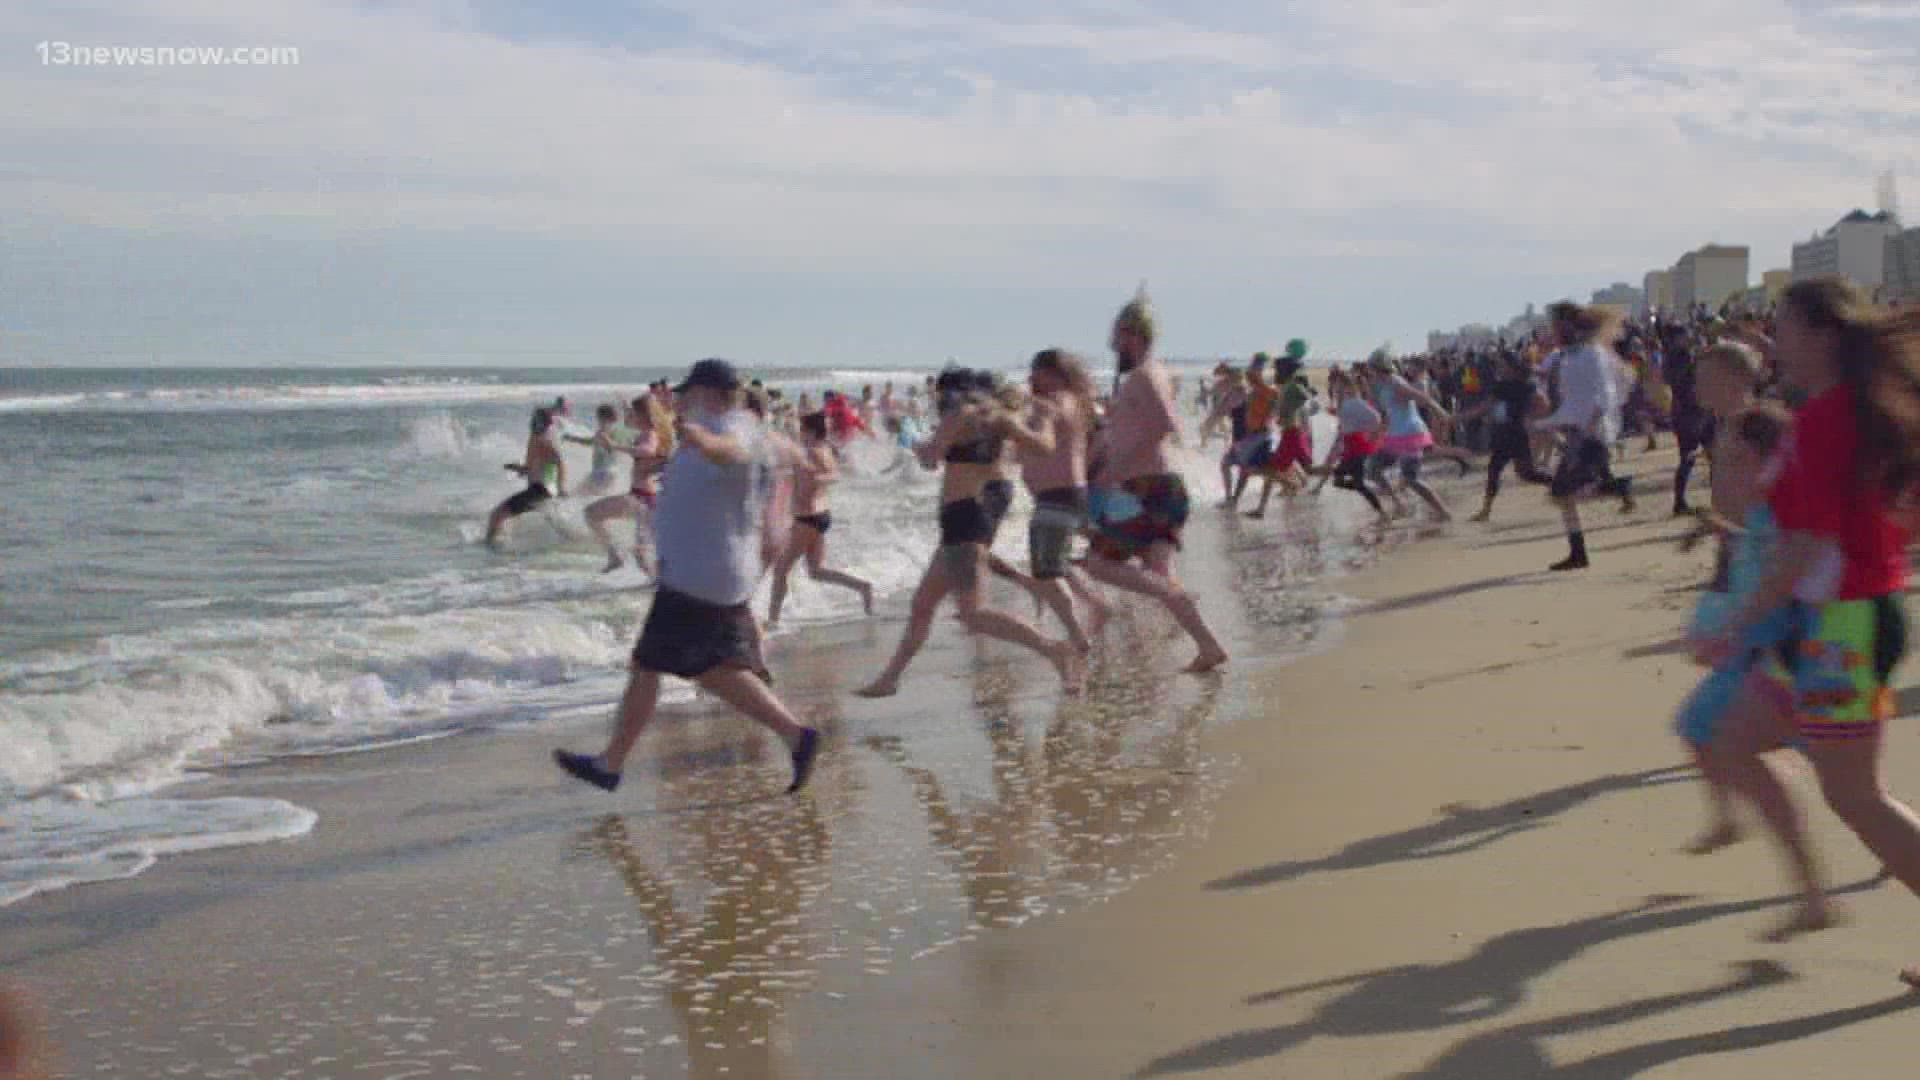 The Virginia Beach Polar Plunge is one of the biggest fundraisers for Special Olympics Virginia. It will be held this year on Feb. 4 at the Hilton Oceanfront Hotel.